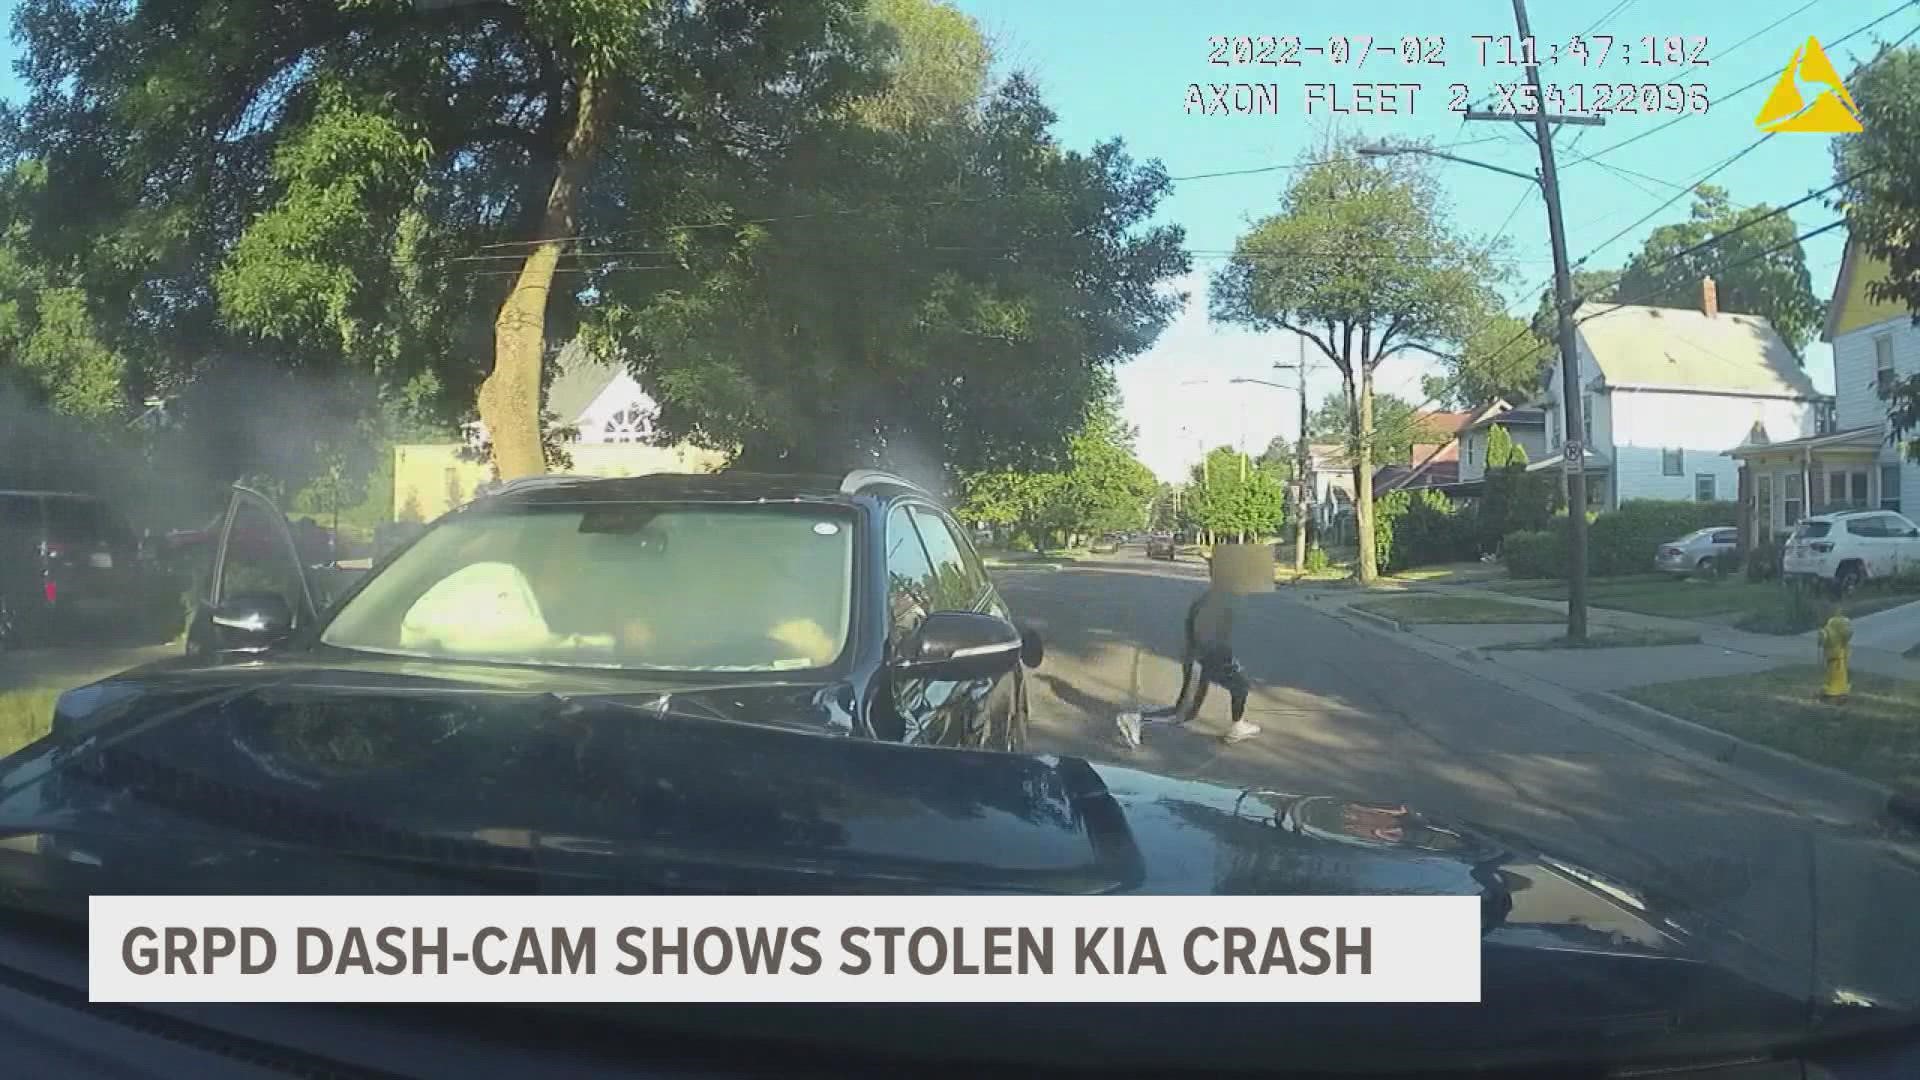 13 ON YOUR SIDE obtained dash cam video that shows the danger these kids are getting into and the lives they're putting at risk.